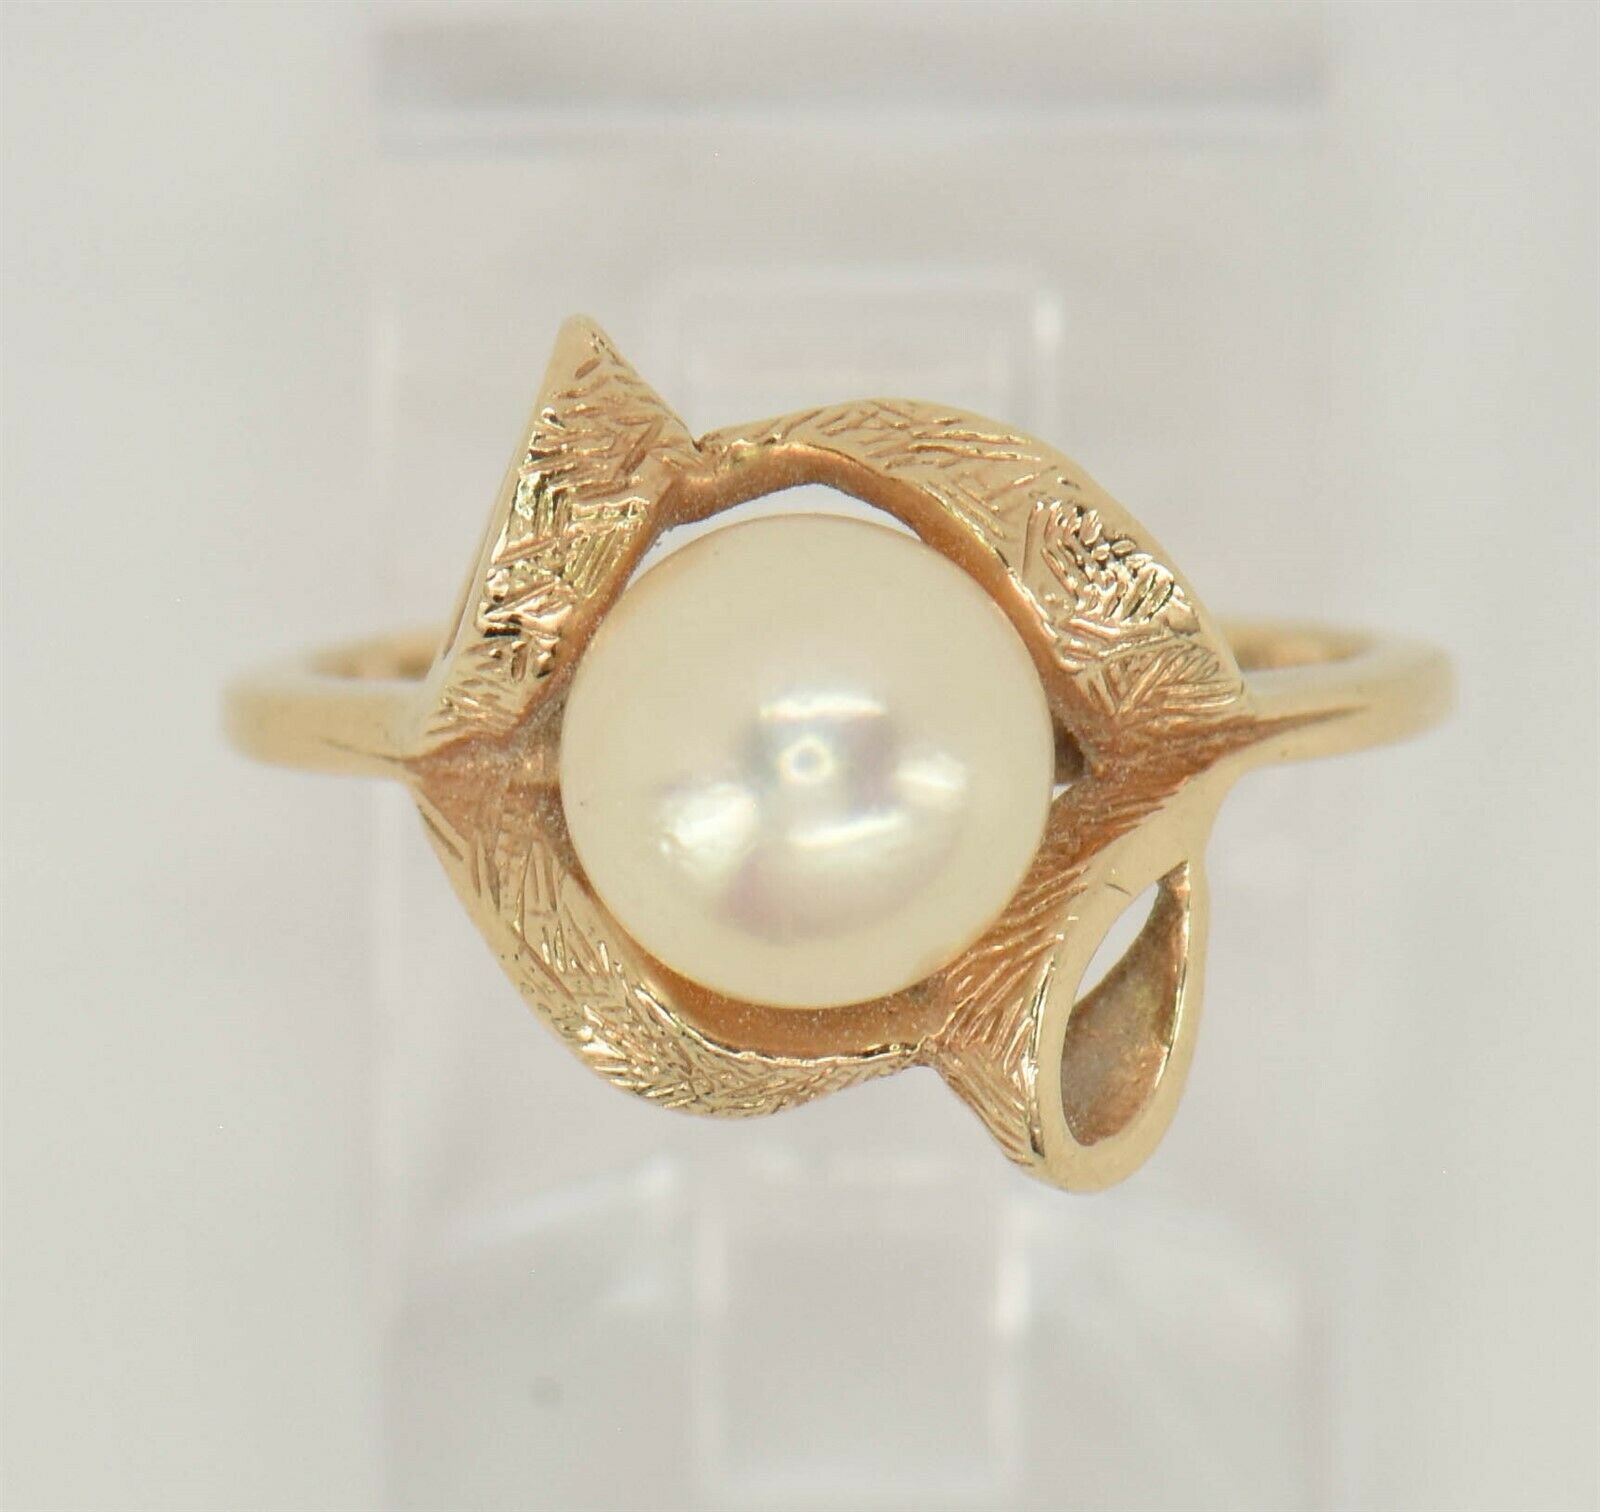 10K Gold Pearl Ring 2.5g Pearl 0.27in Size 4 RG0113